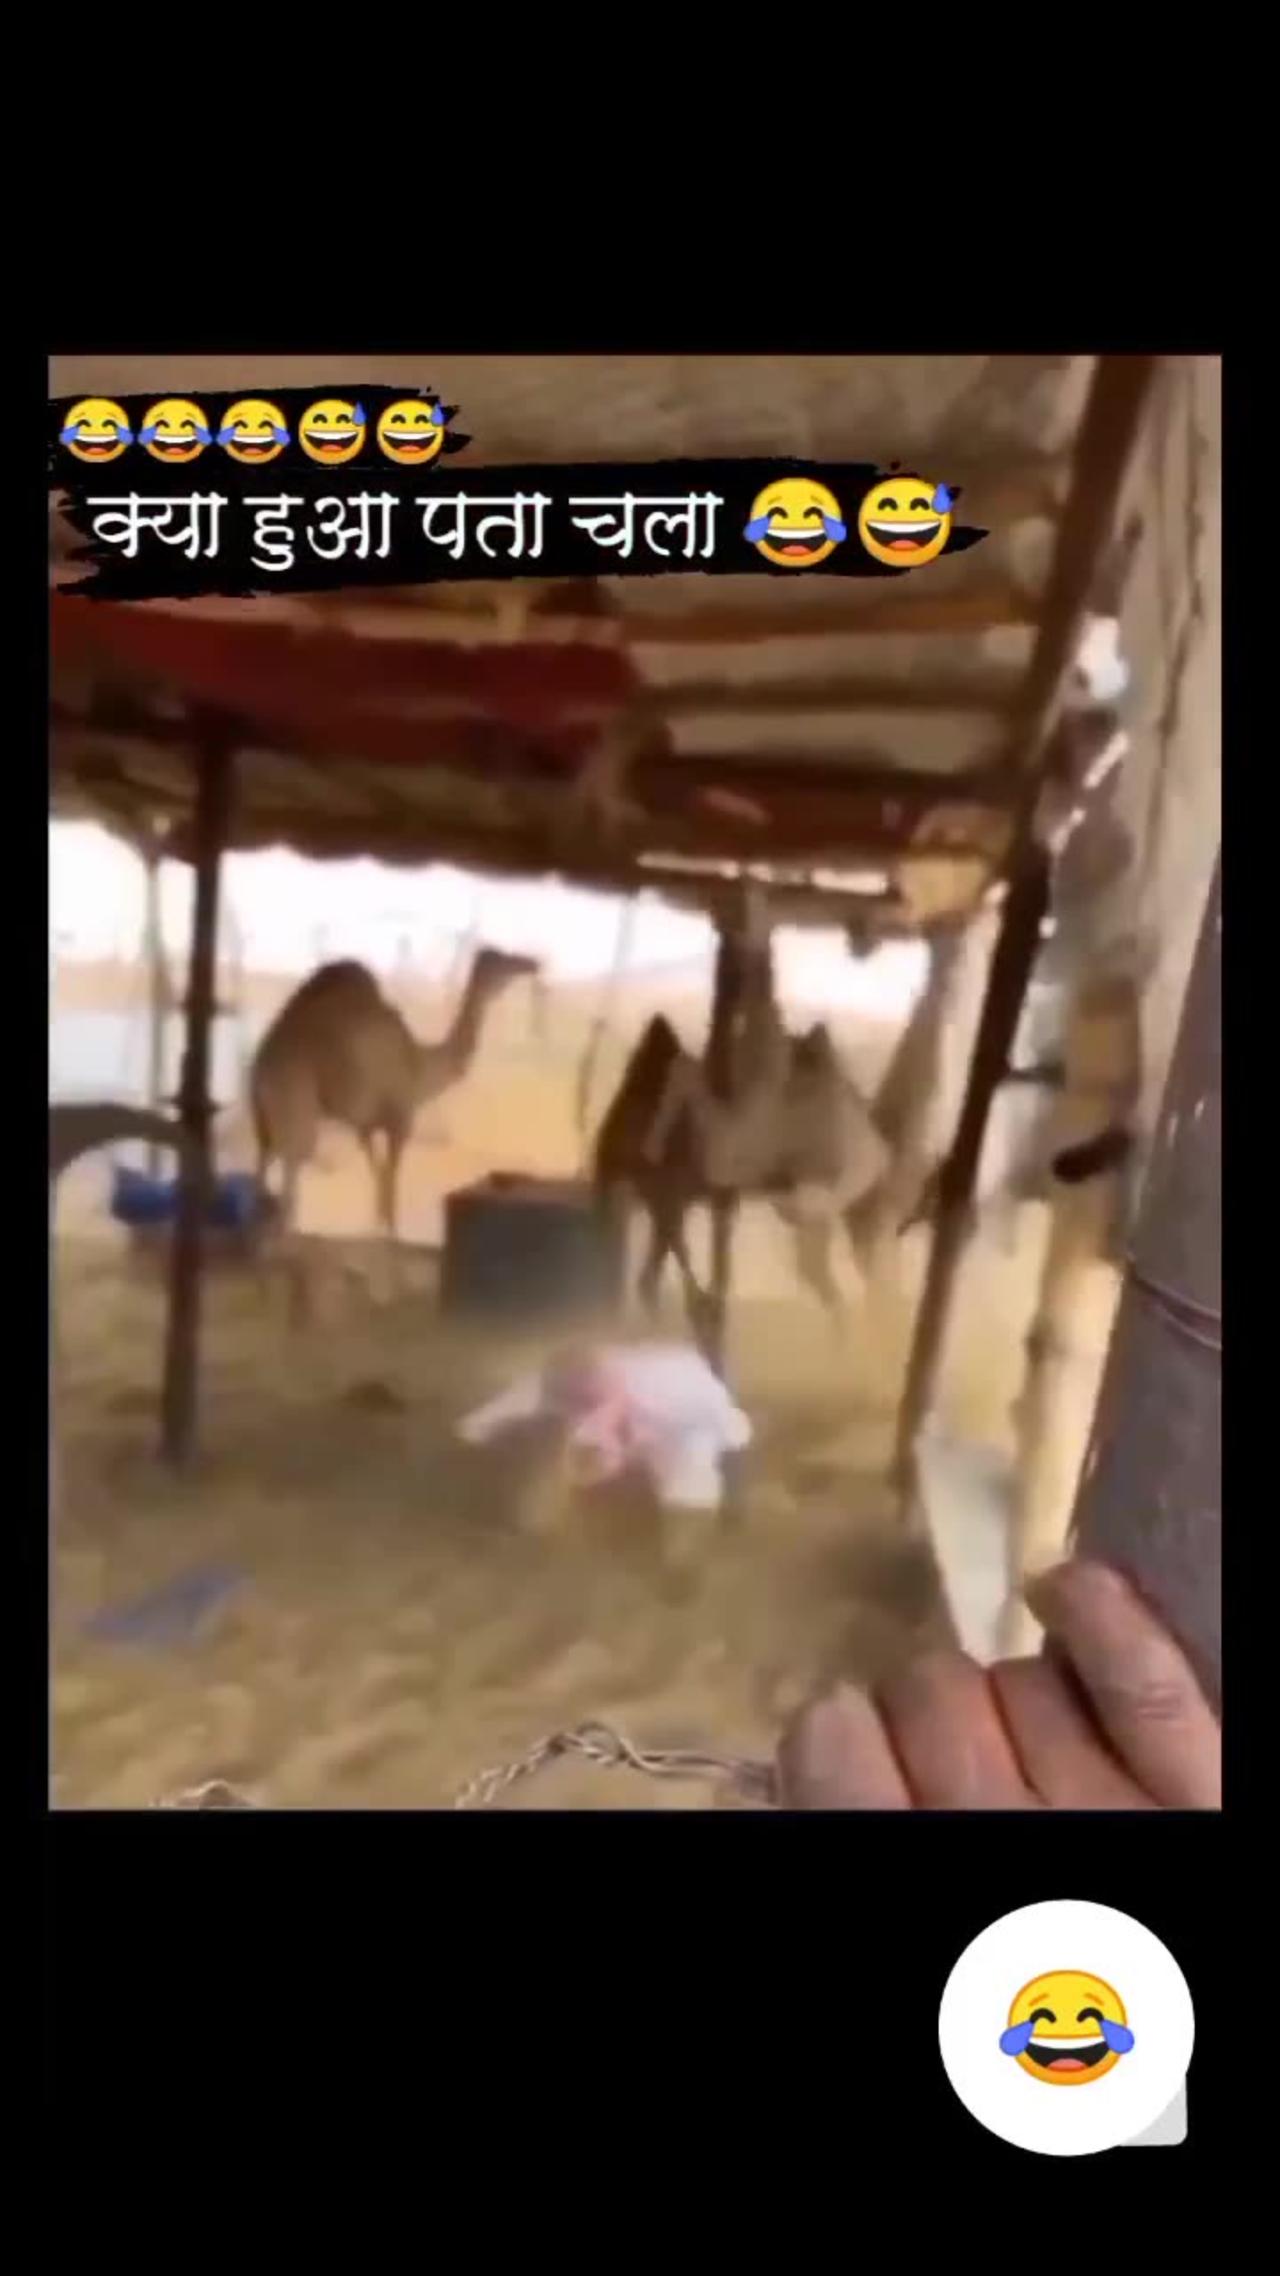 Funny video 😅😅😅